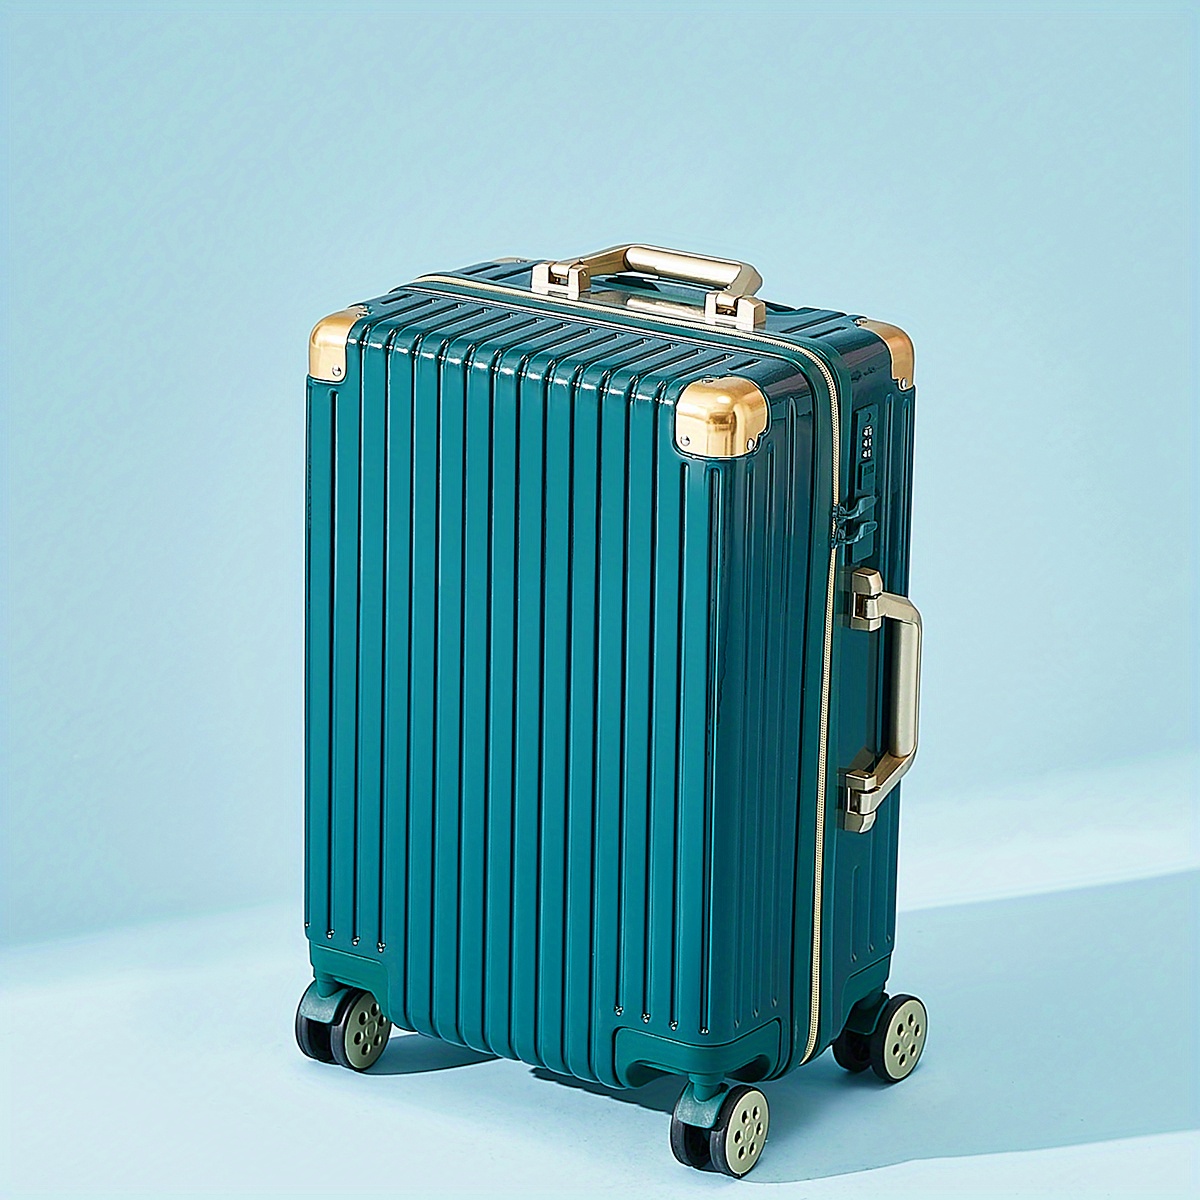 Roue valise universelle – Fit Super-Humain